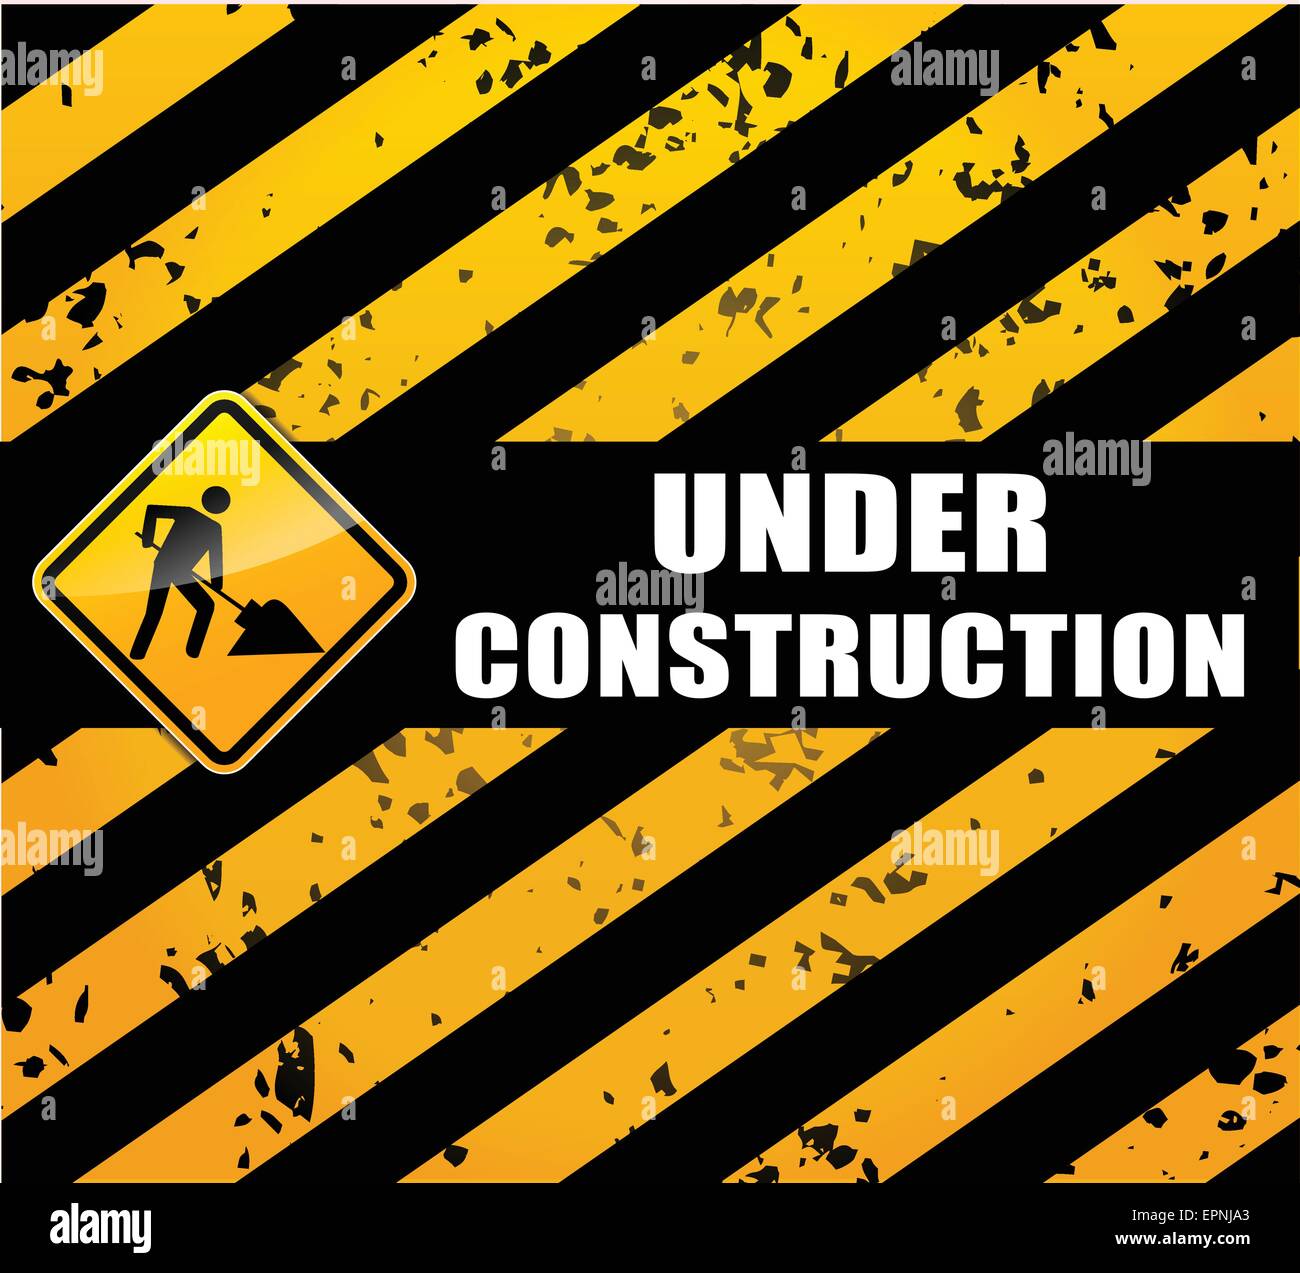 illustration of under construction page for website Stock Vector Image ...